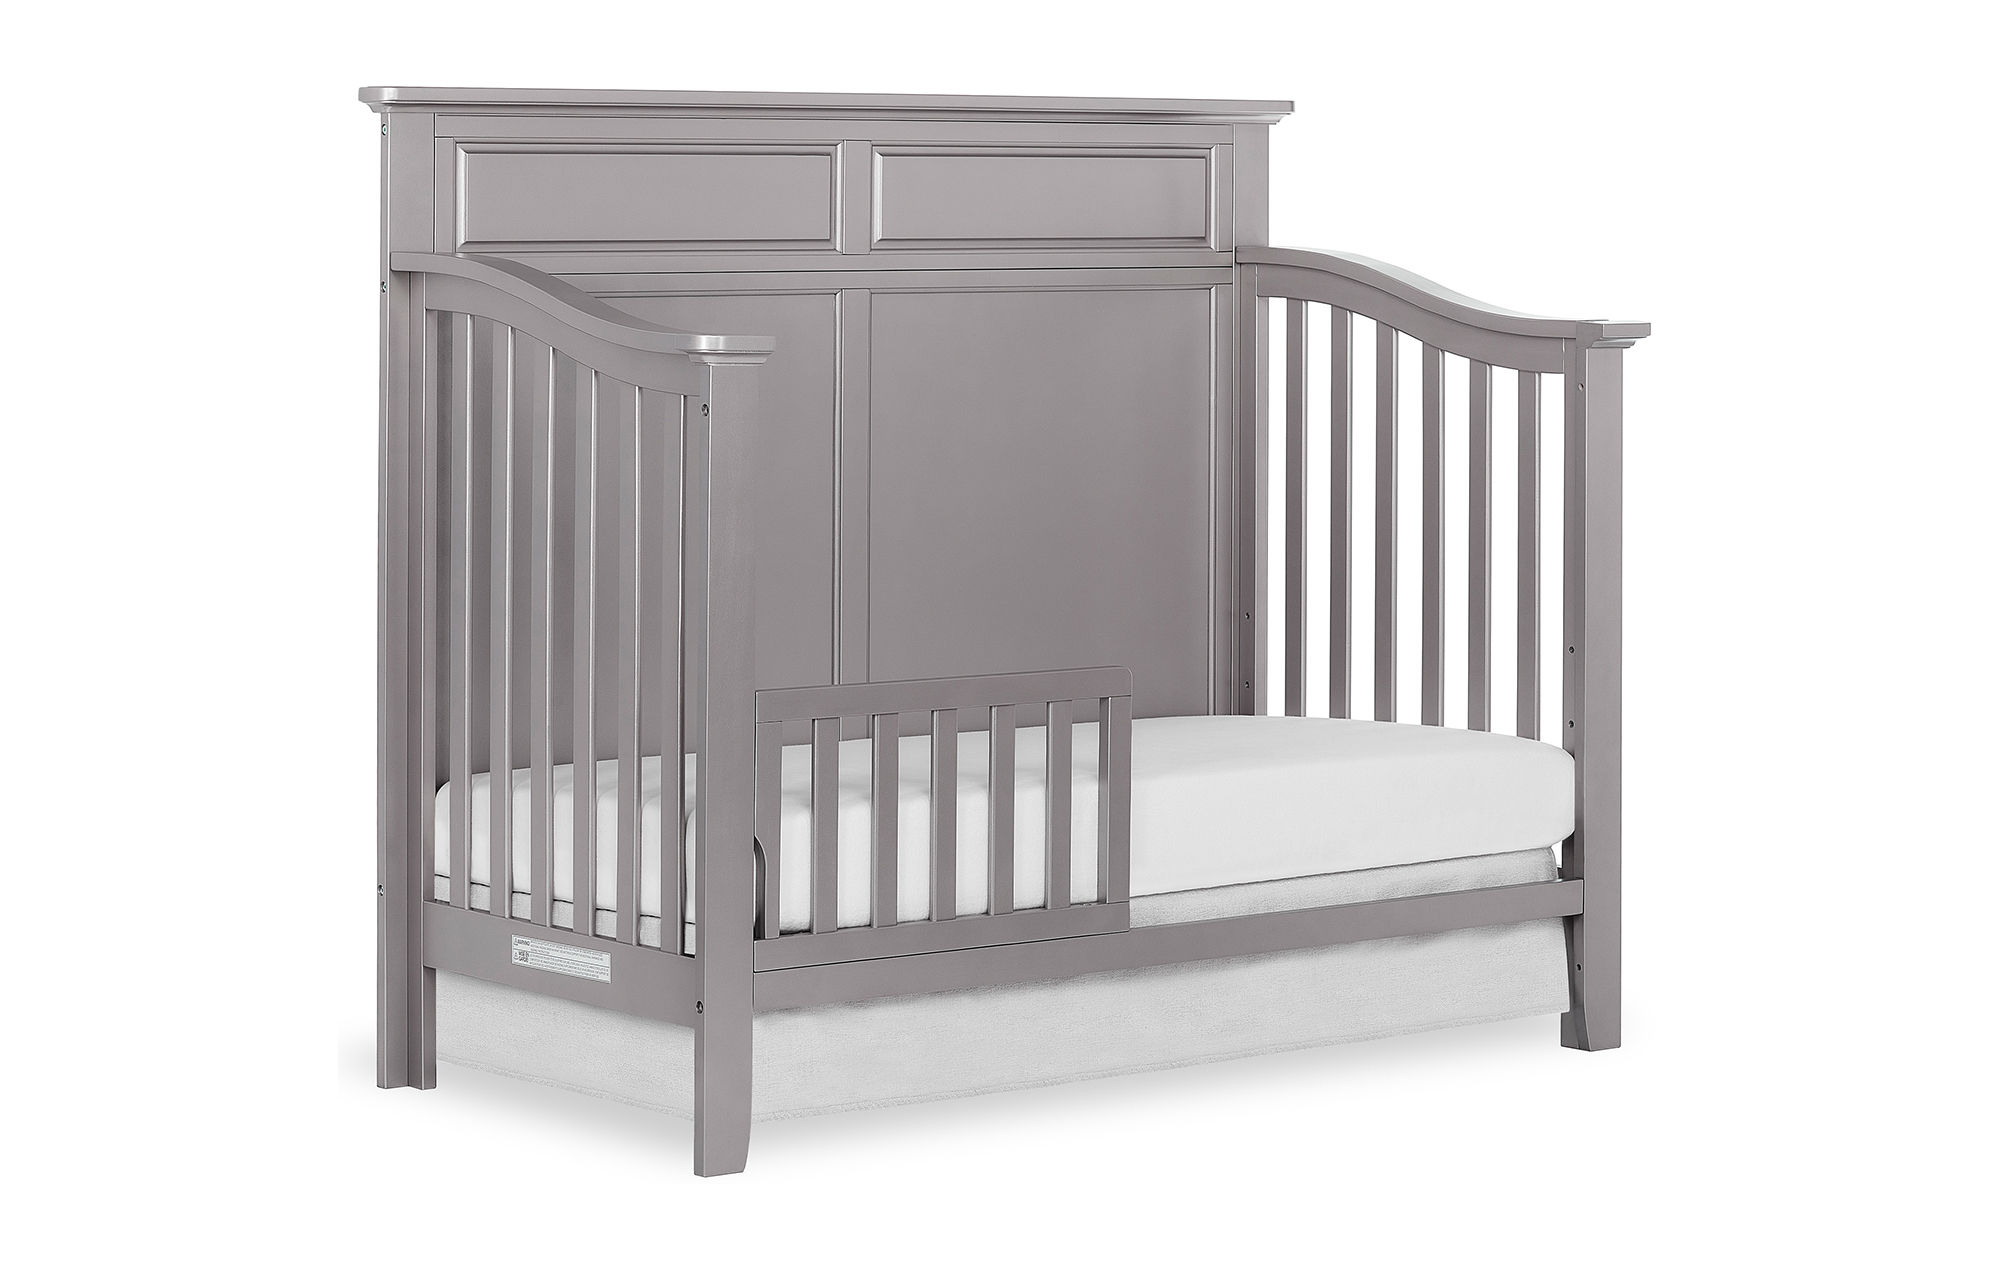 774-MGREY Fairview Toddler Bed